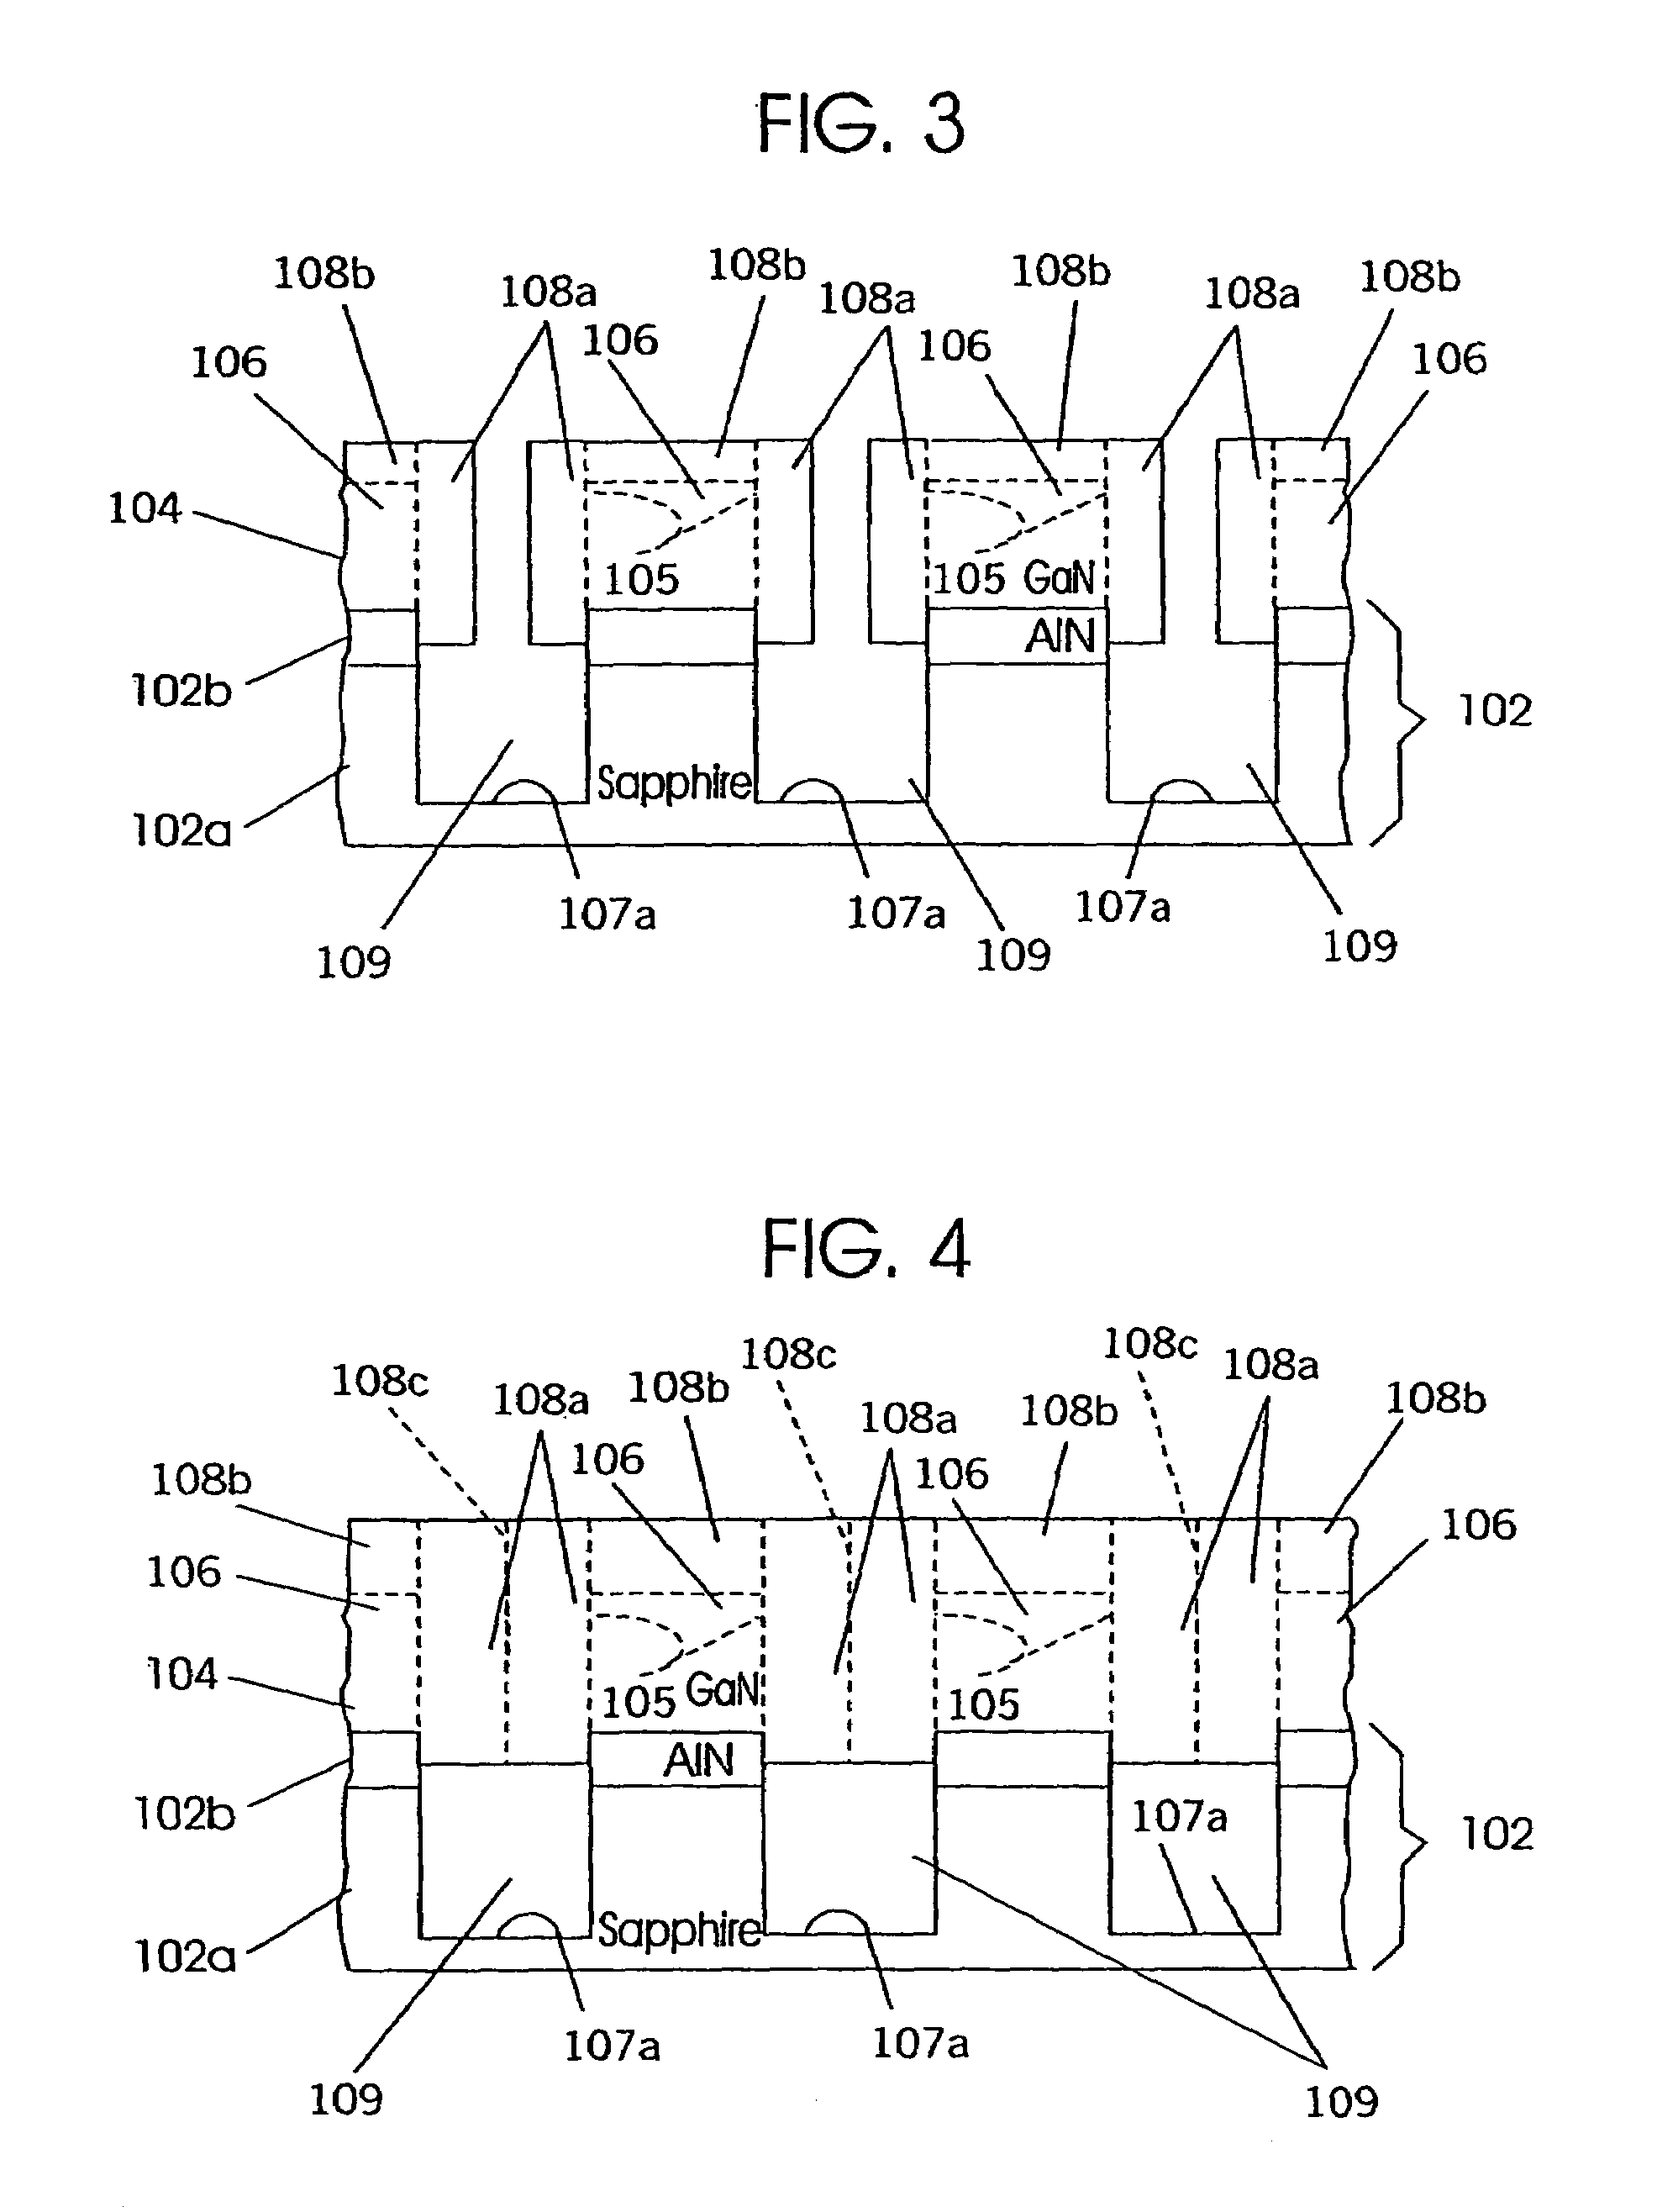 Pendeoepitaxial methods of fabricating gallium nitride semiconductor layers on sapphire substrates, and gallium nitride semiconductor structures fabricated thereby